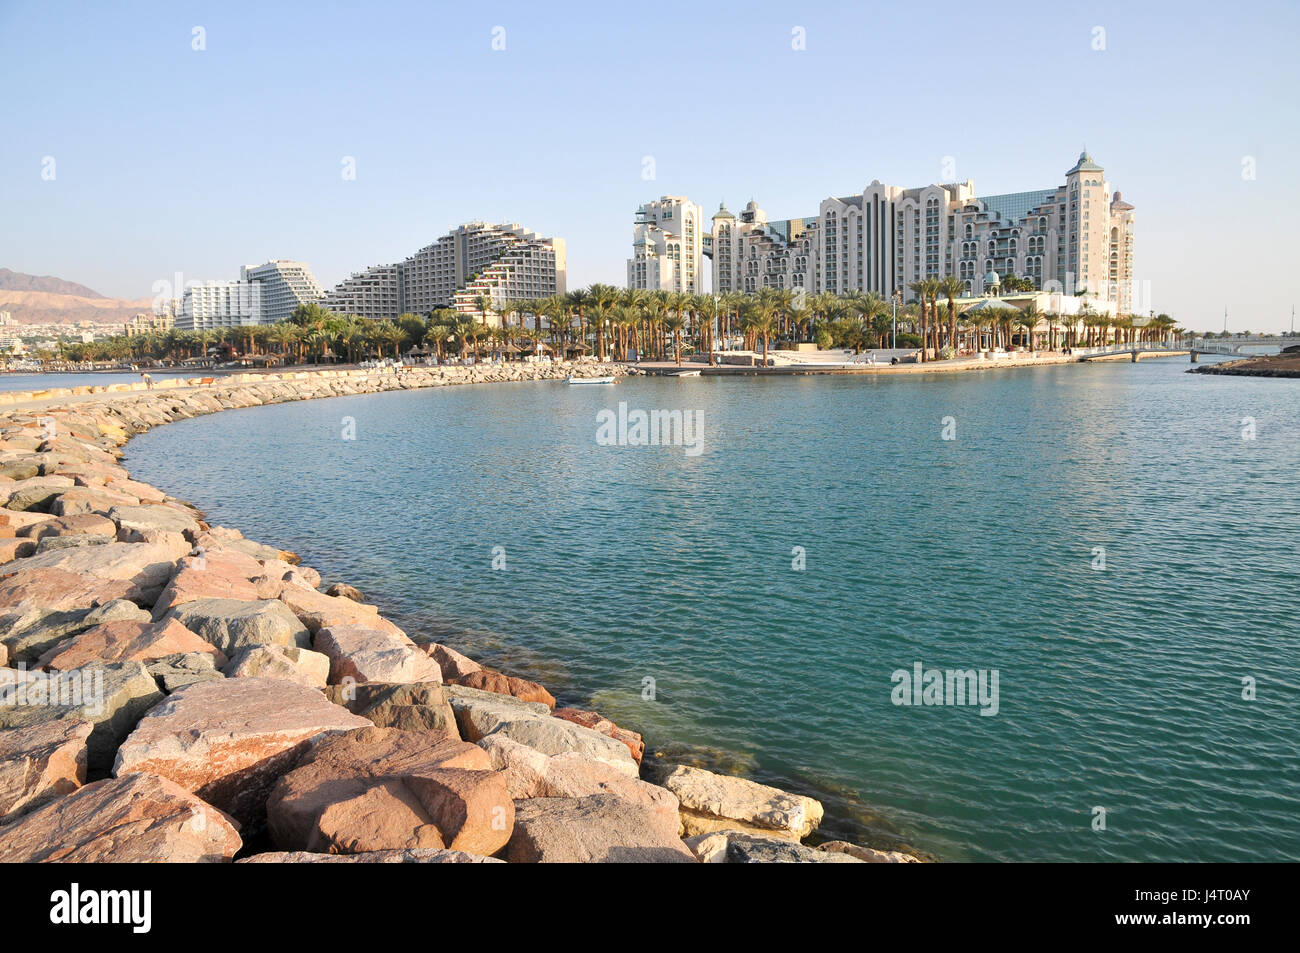 Israel, Eilat Beach, Hotels in the background Stock Photo